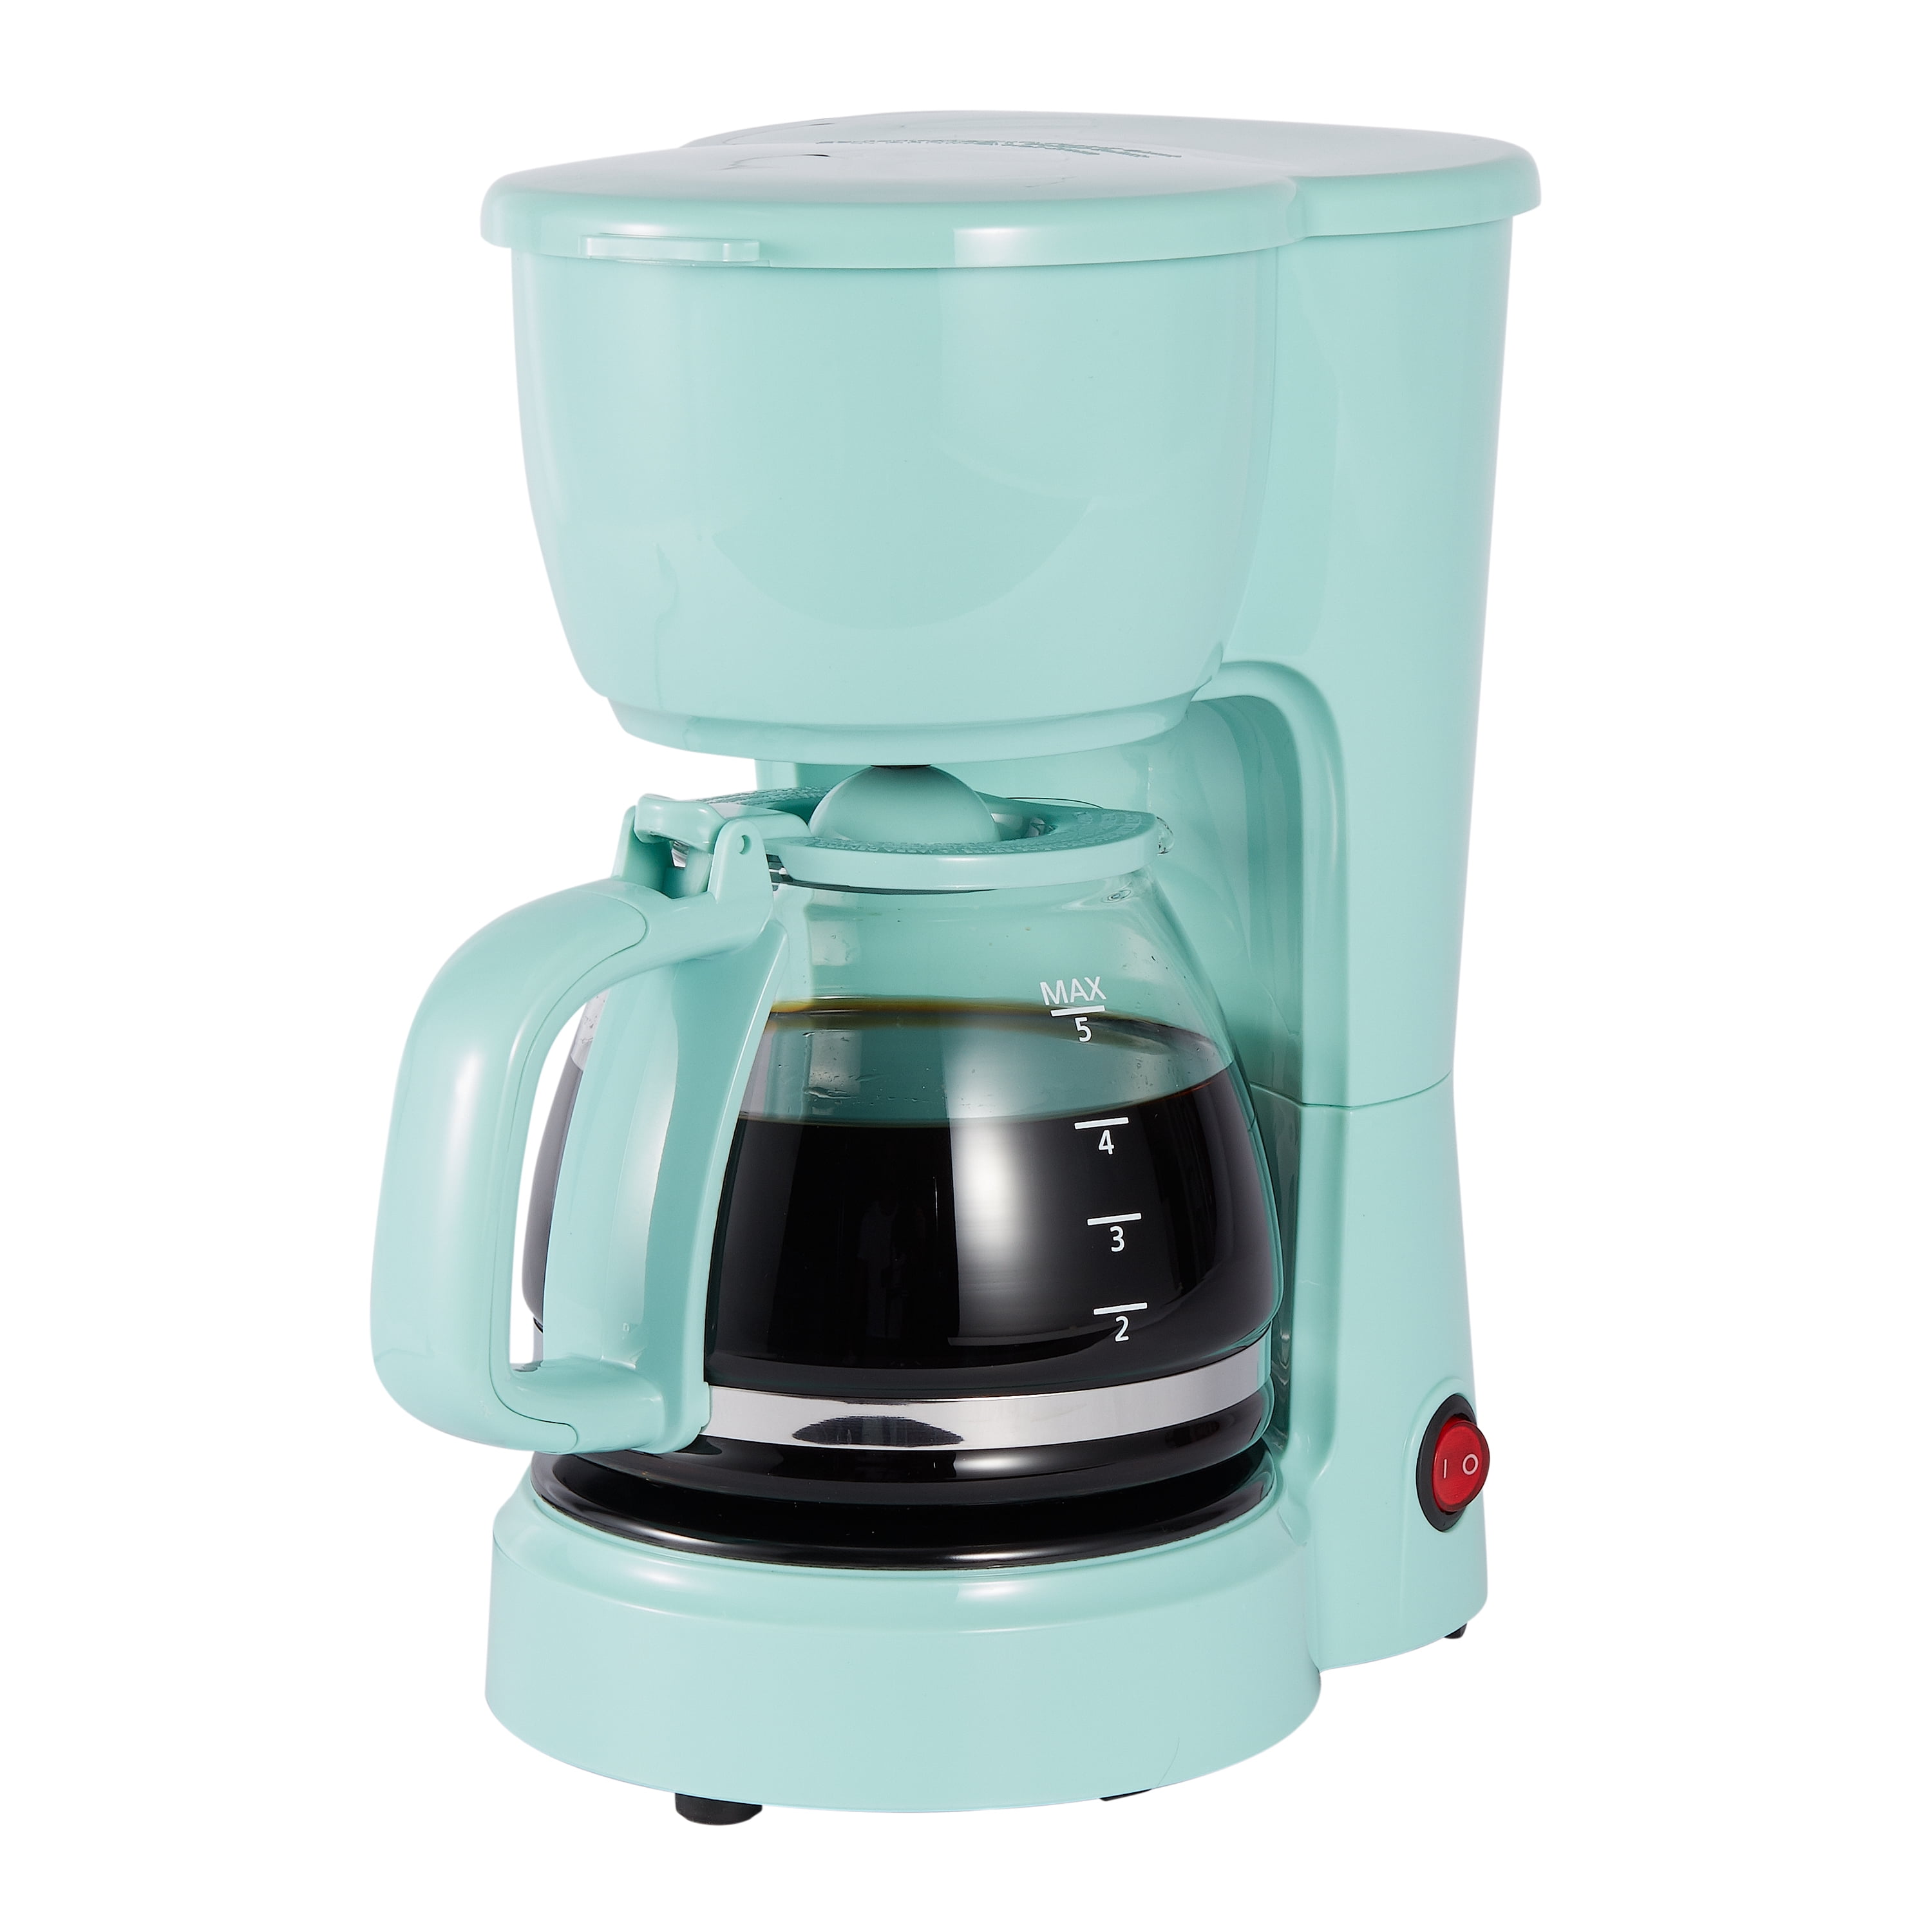 Mainstays 5Cup Glass Carafe Coffee Maker, Mint Green